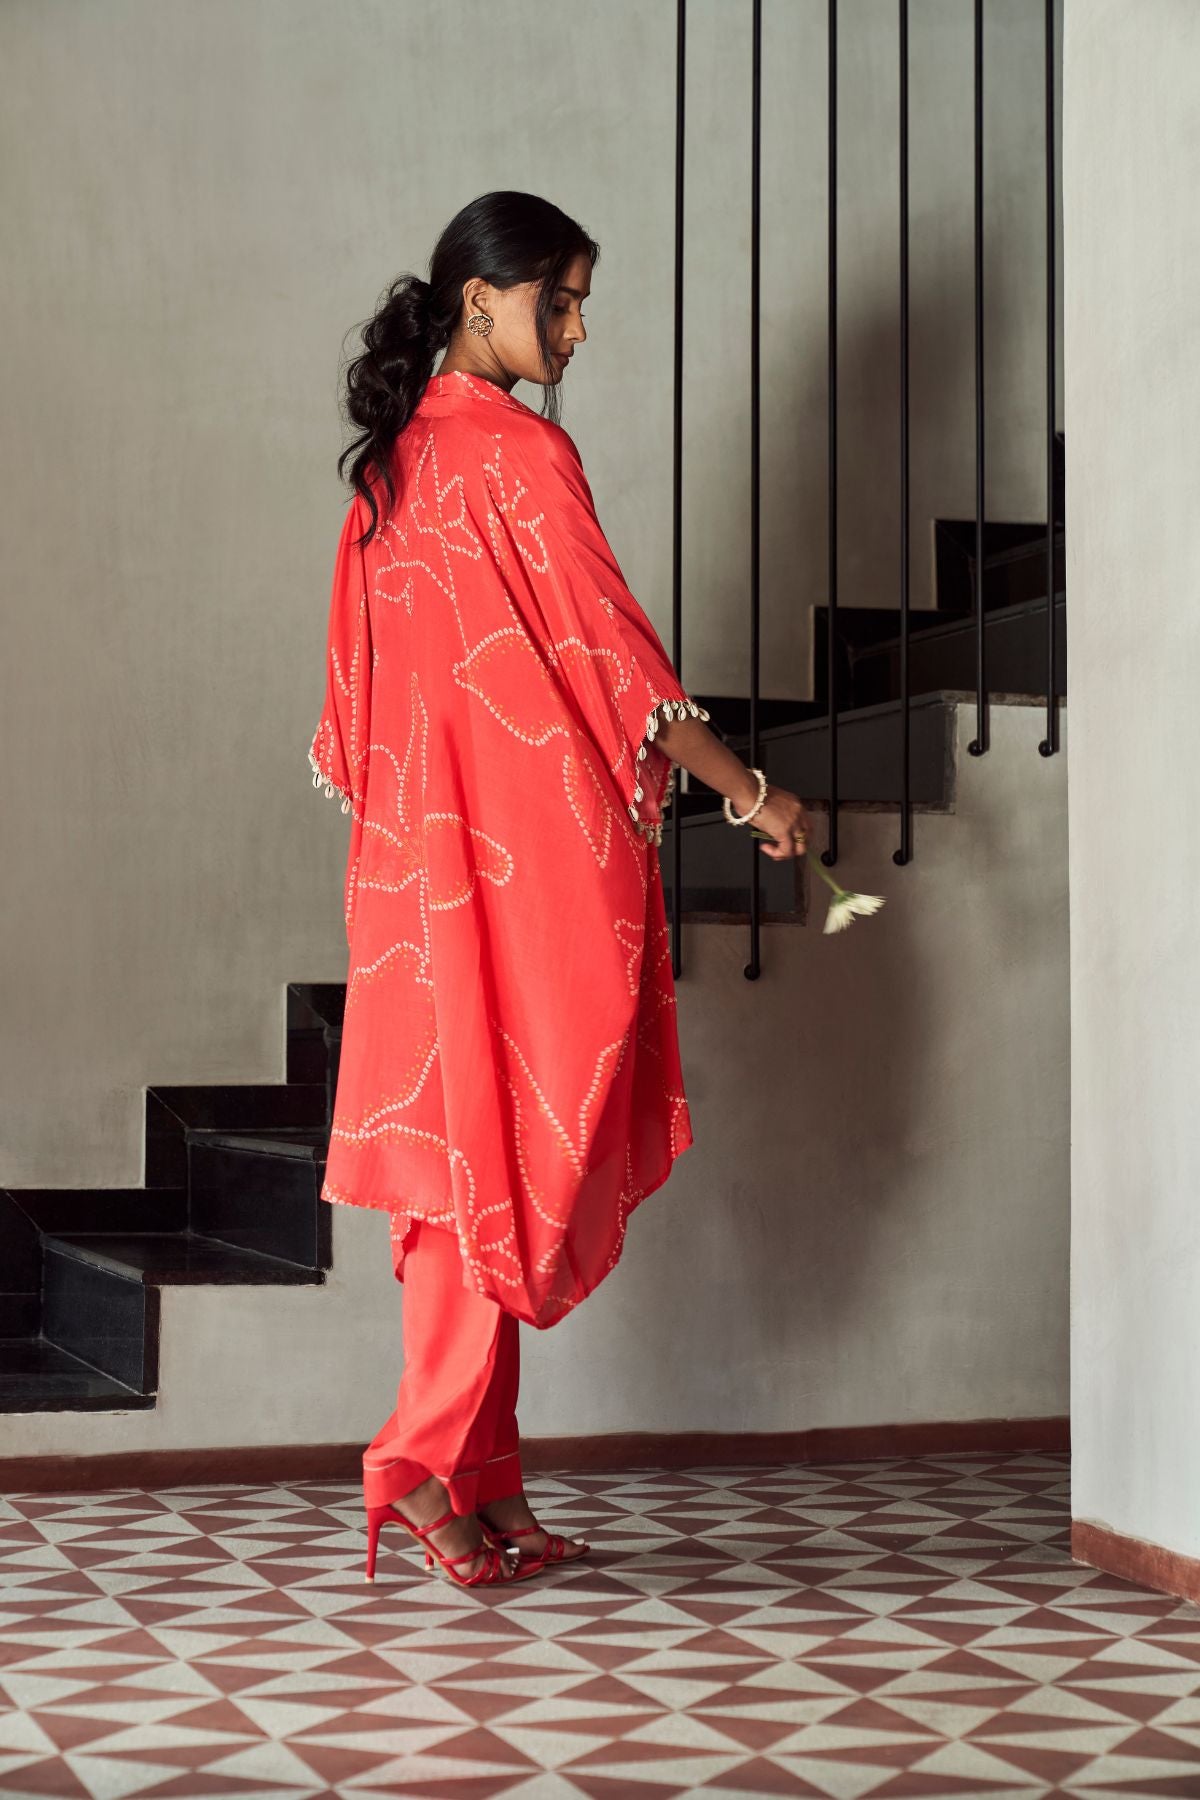 Kaftan style top paired with a straight pant